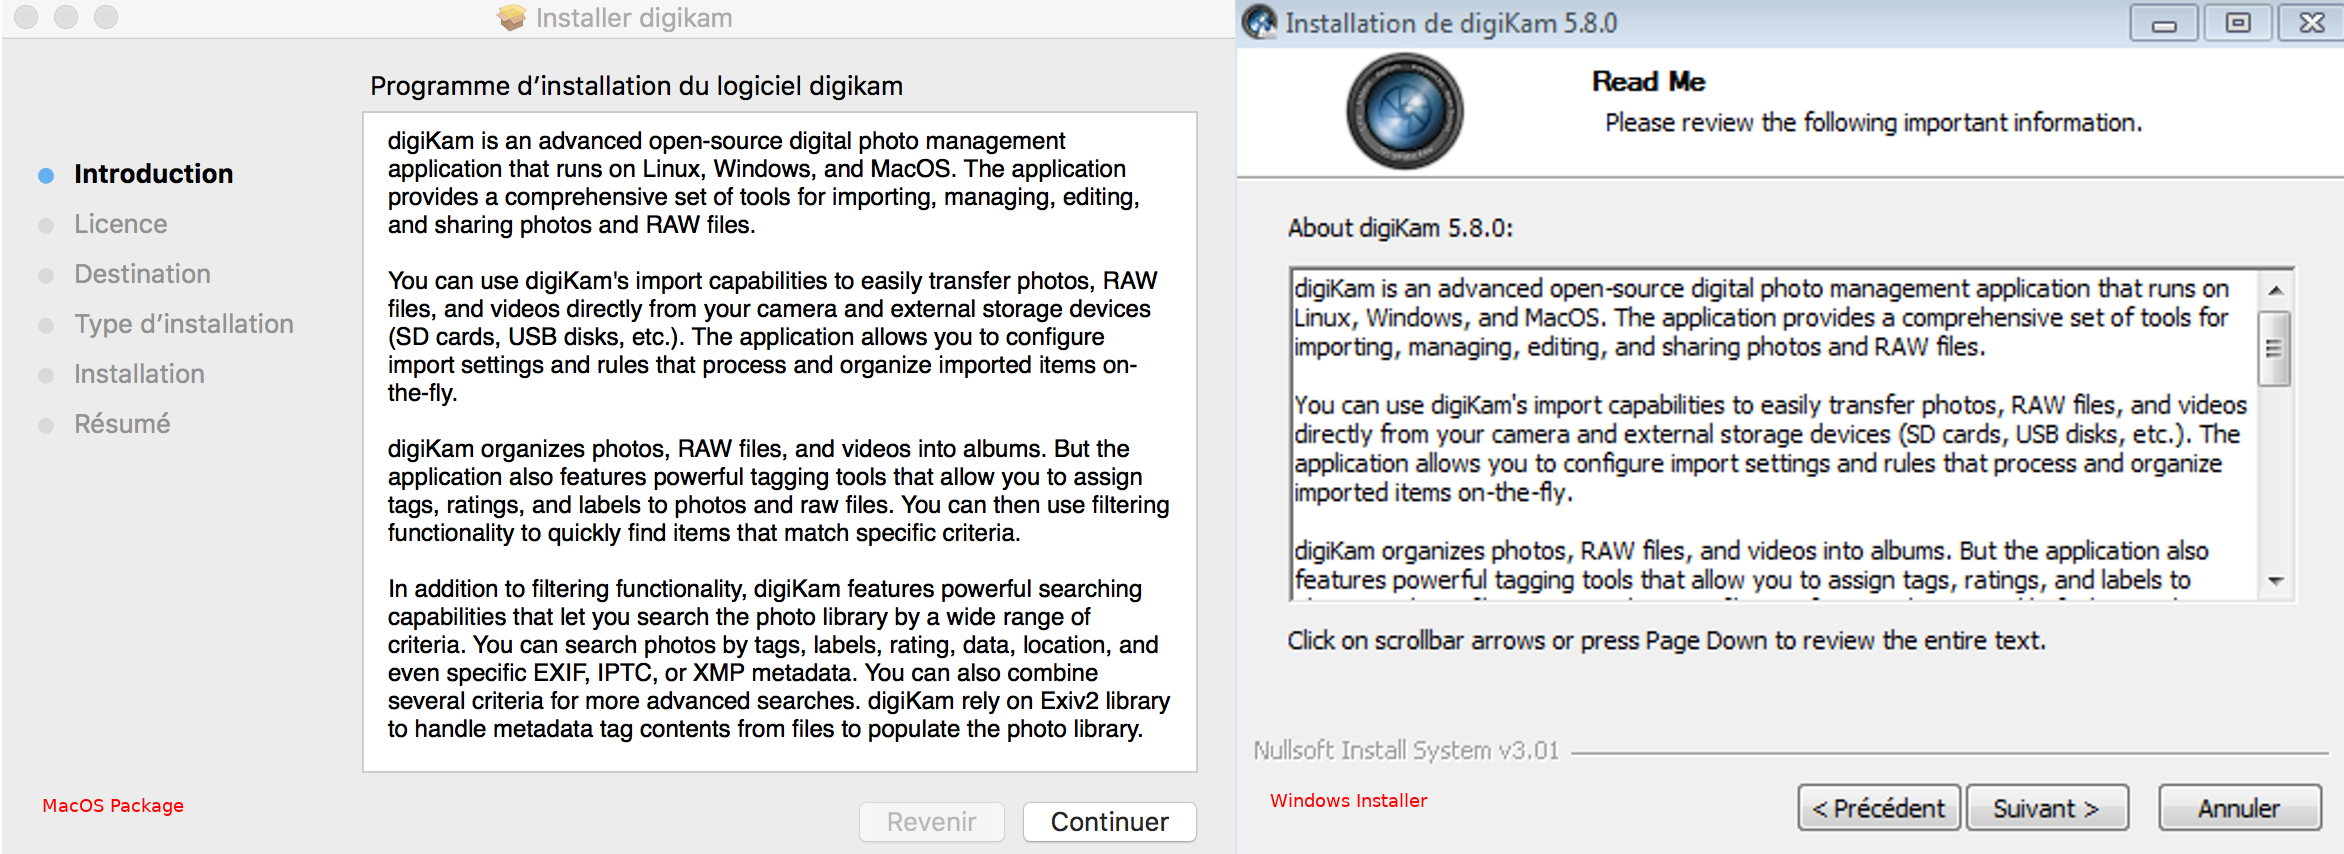 MacOS and Windows digiKam Installers in Action